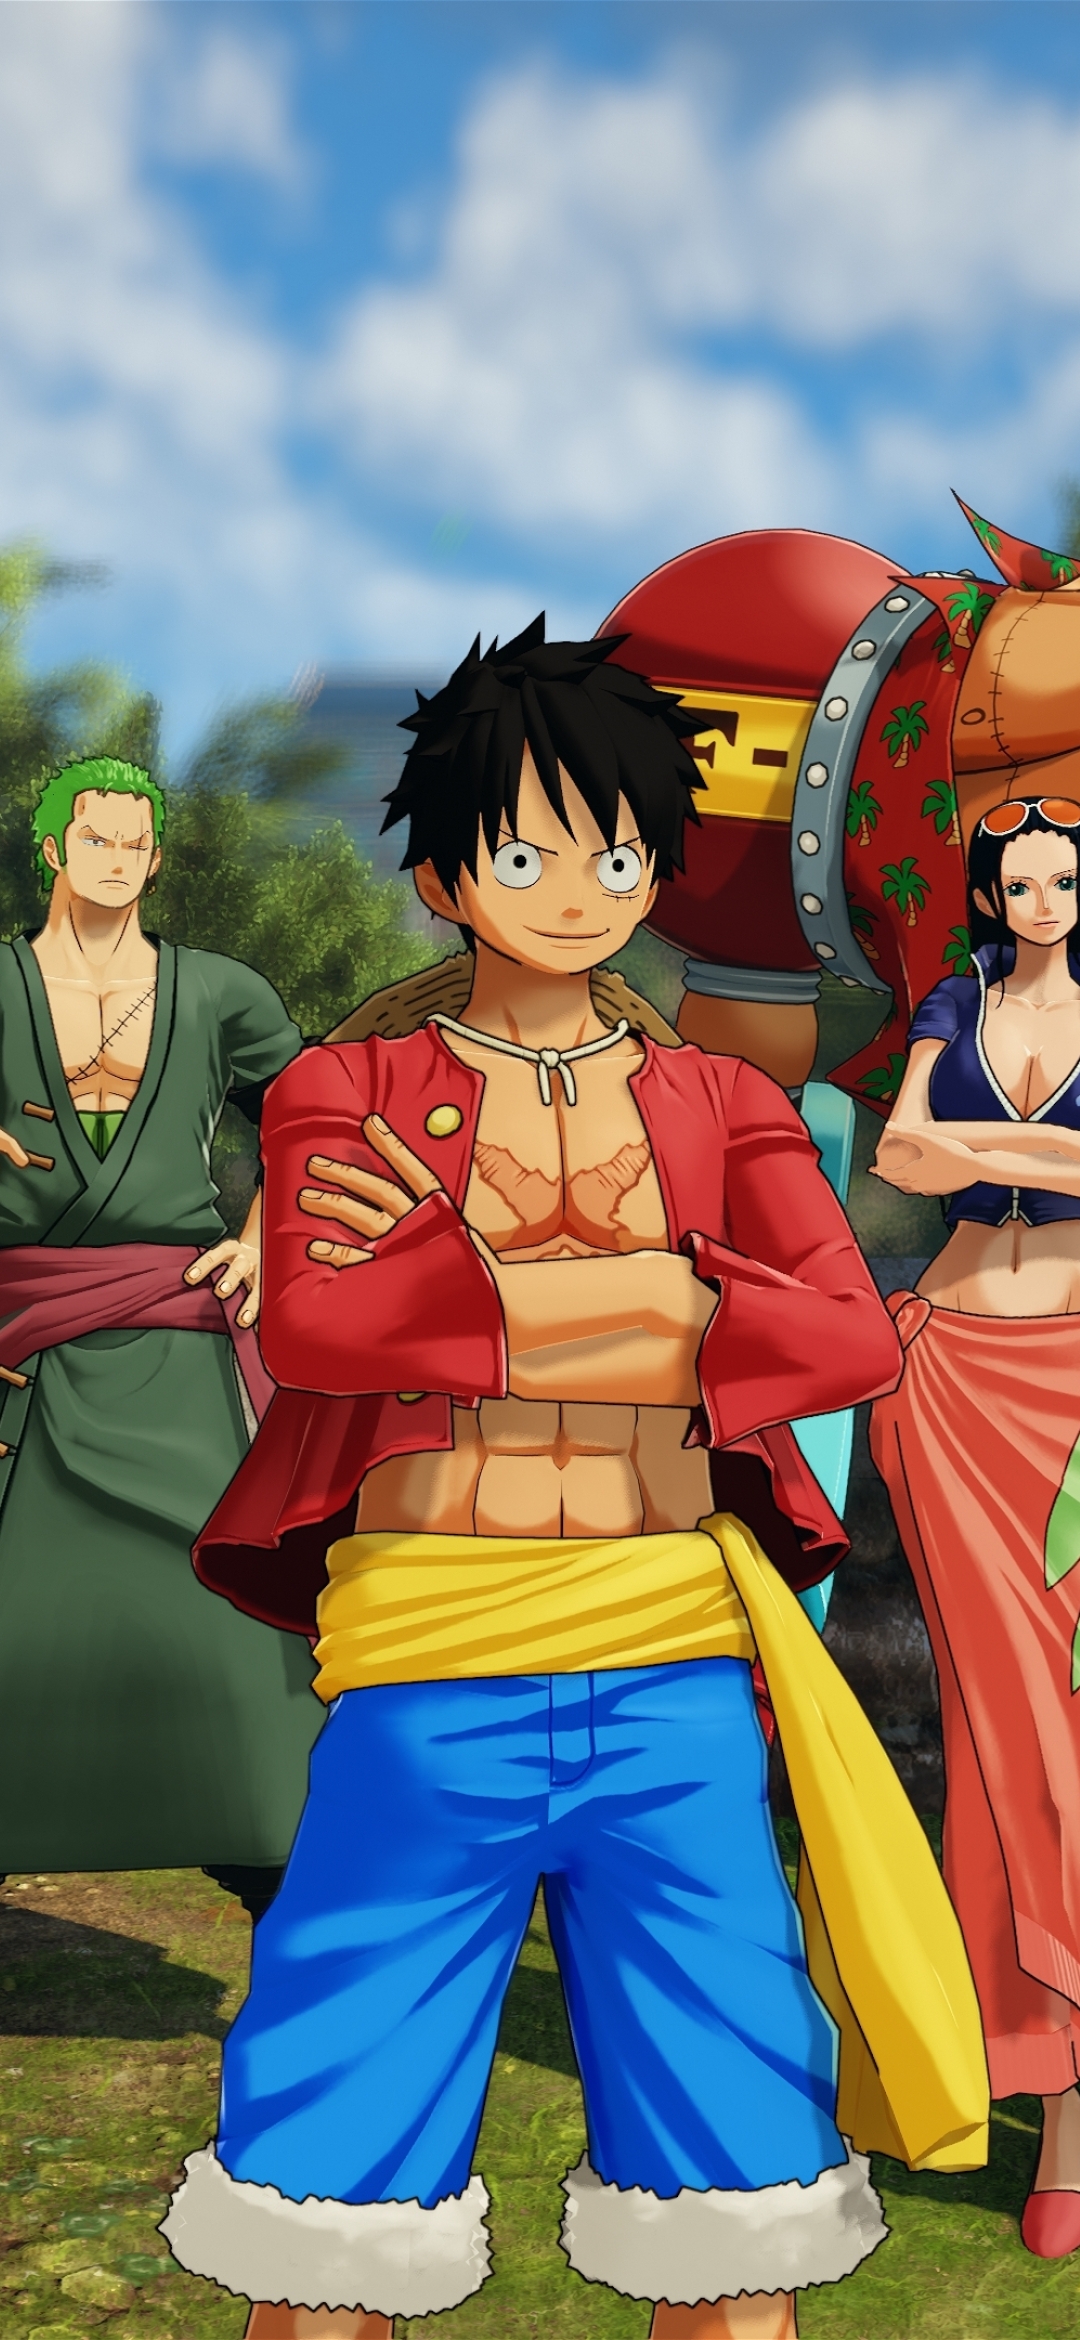 Wallpaper One Piece 4K : One Piece Backgrounds, Pictures, Images